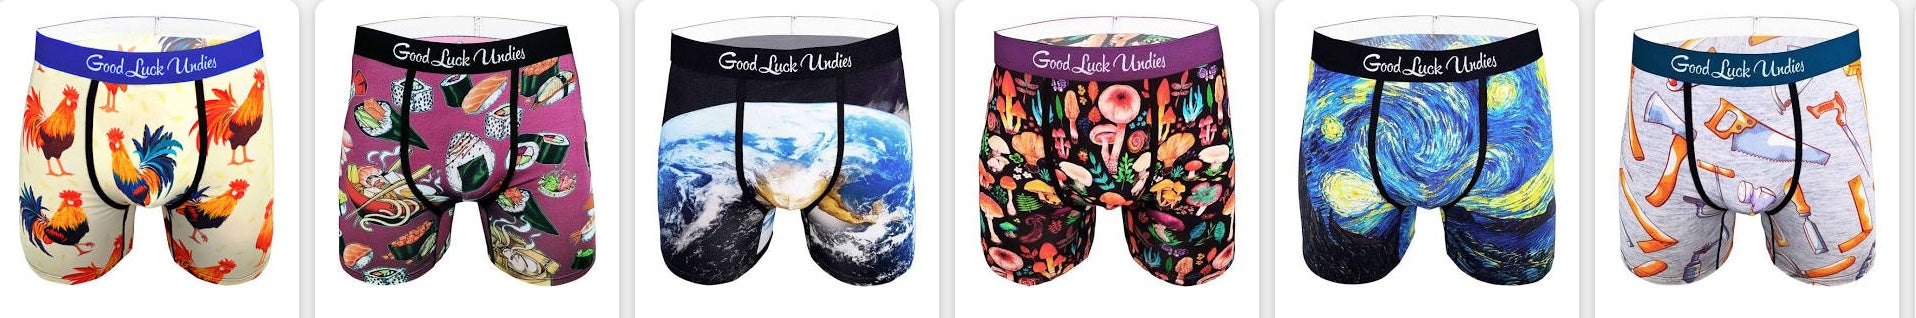 Men's Good luck Underwear – Deserve Sterling Jewelry and Fashion